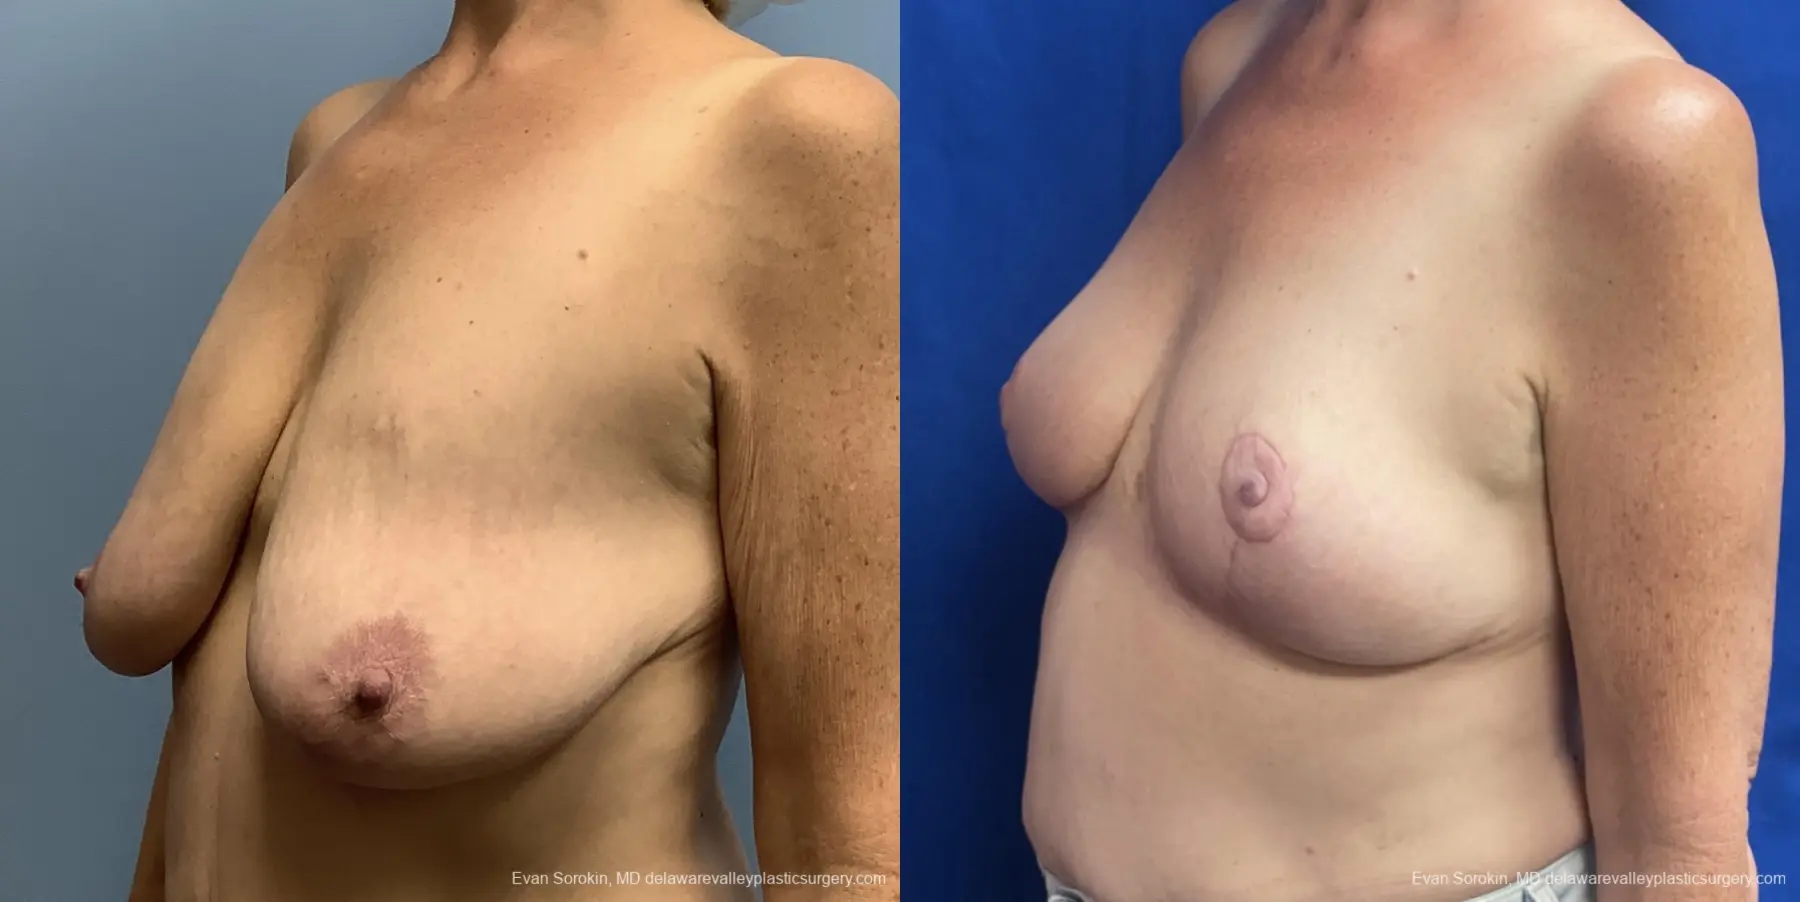 Breast Lift: Patient 1 - Before and After 4